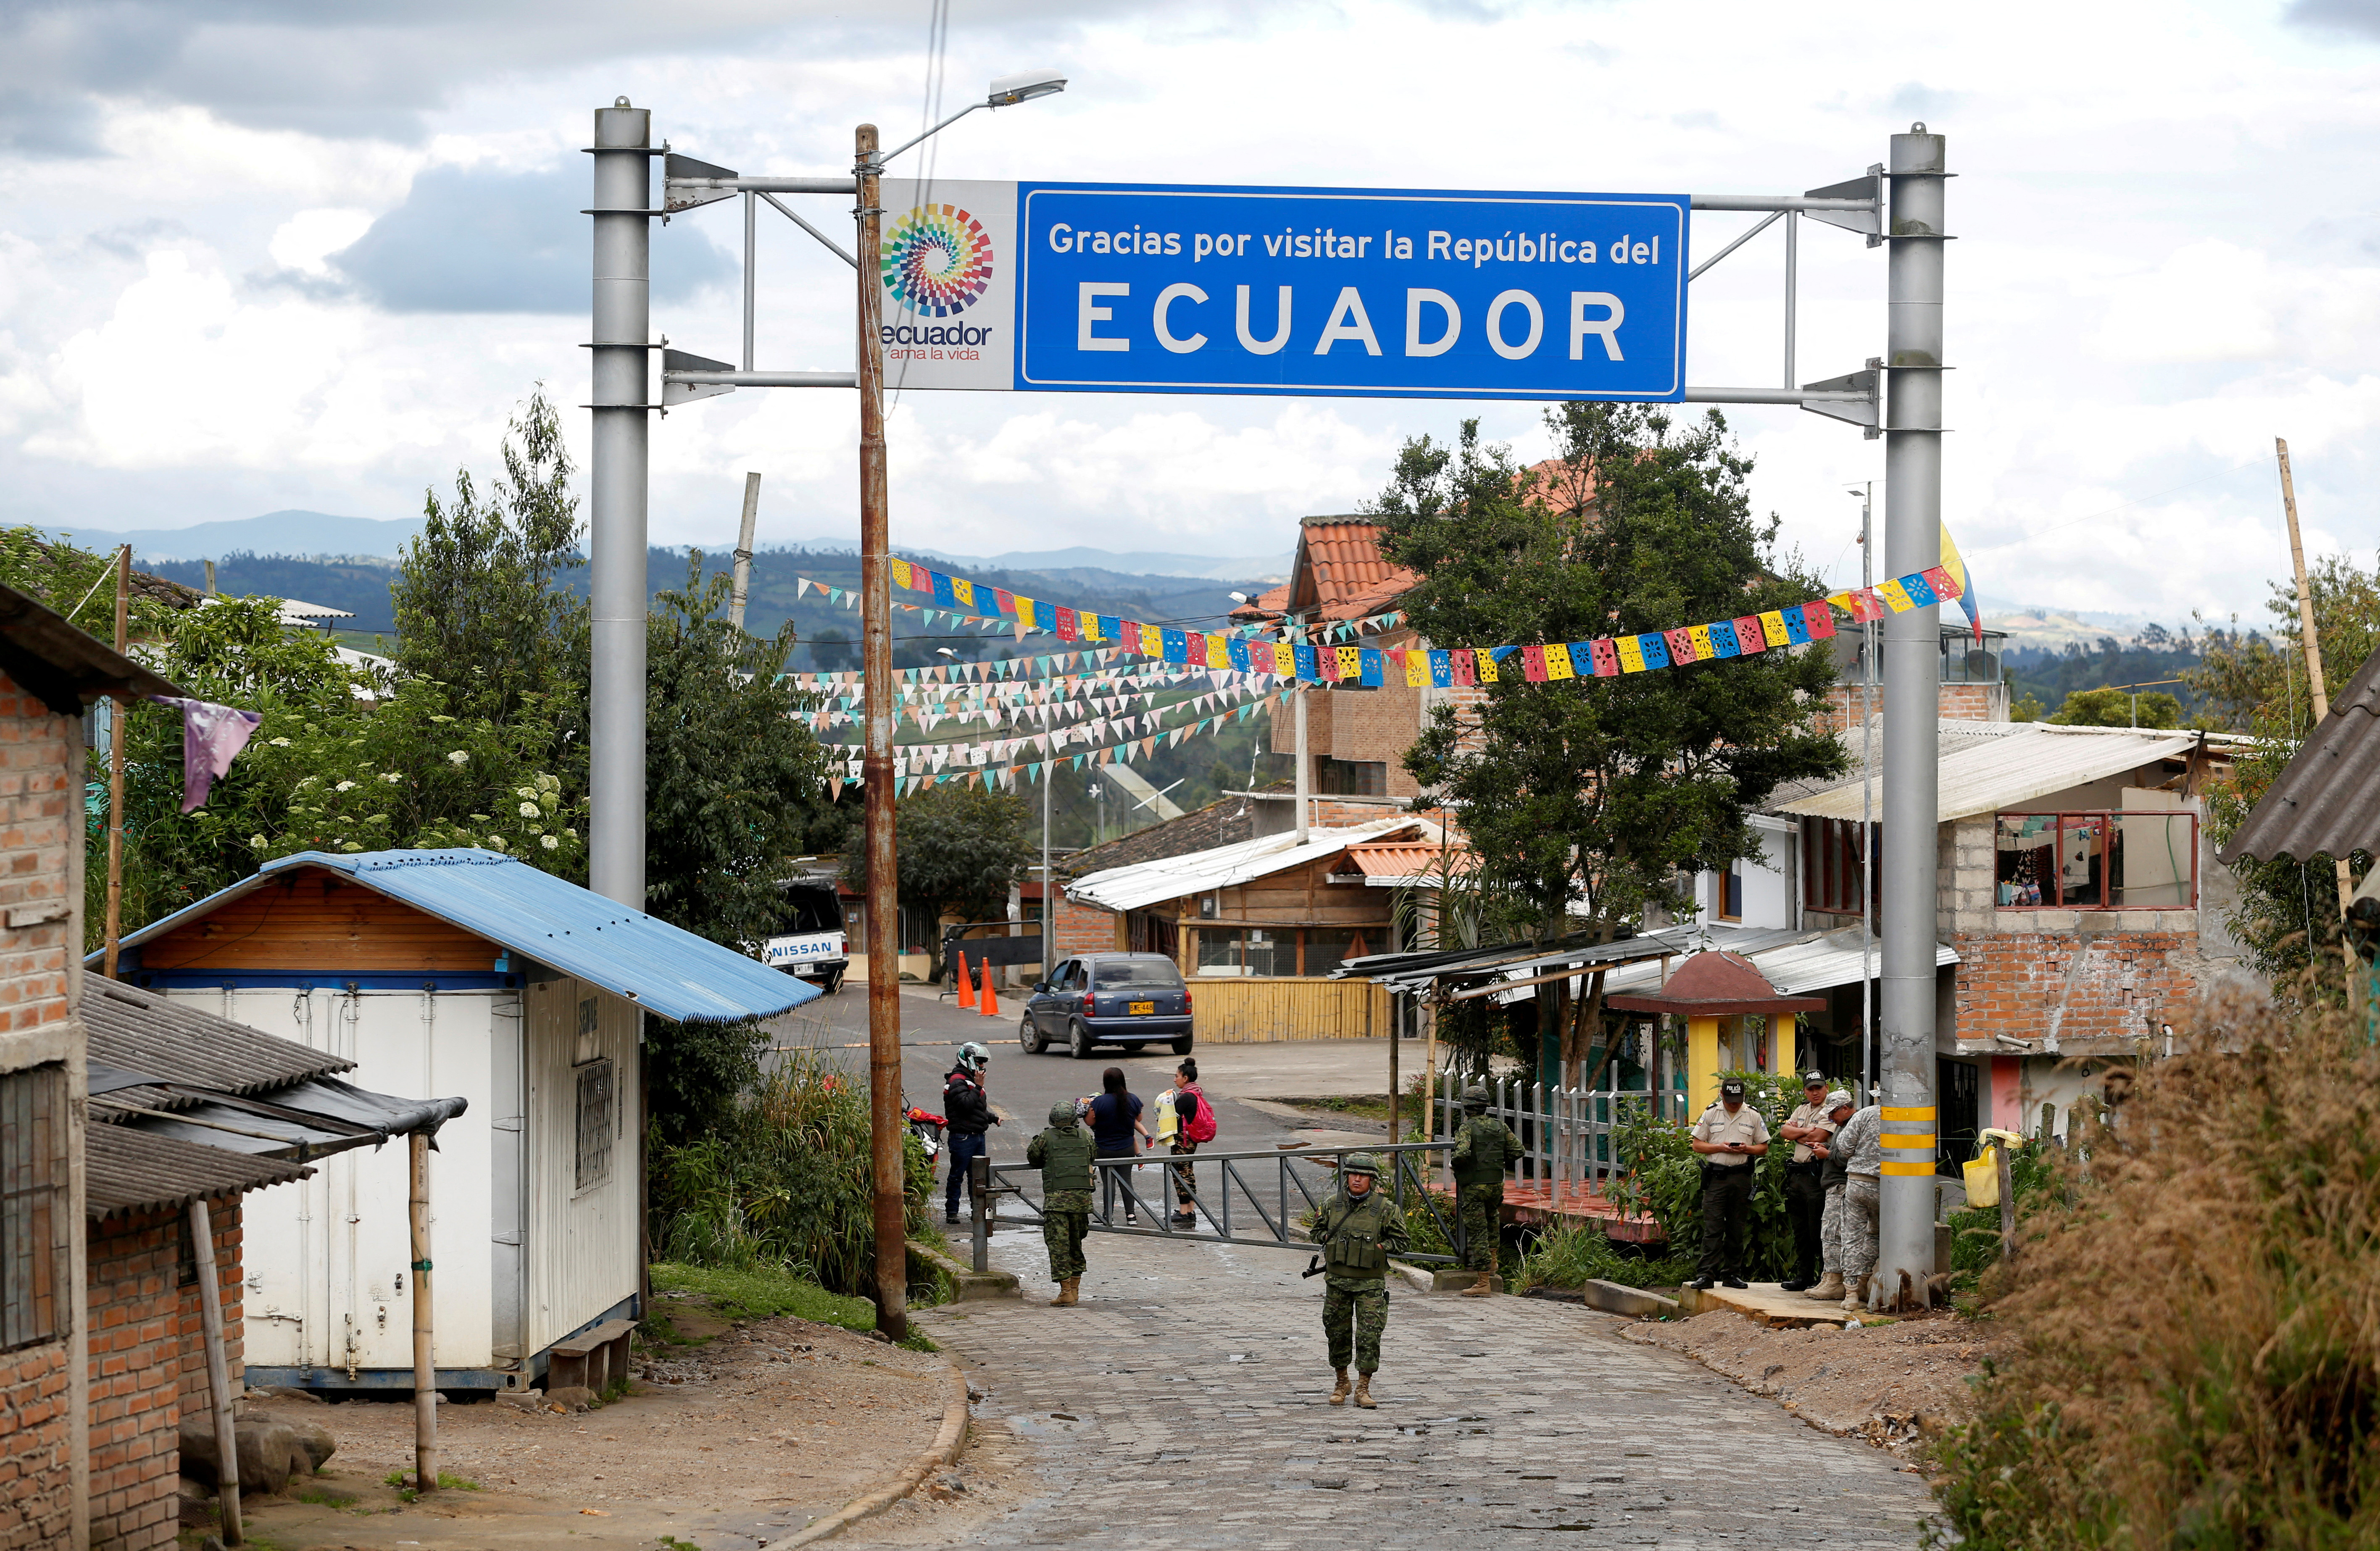 FILE PHOTO: Soldiers stand guard on the Ecuadoran side of a border crossing with Colombia, in Tufino, Ecuador, after Ecuador's government announced the closure of its borders from Sunday to all foreign travelers due to the spread of the coronavirus (COVID-19), March 15, 2020. REUTERS/Daniel Tapia/File Photo